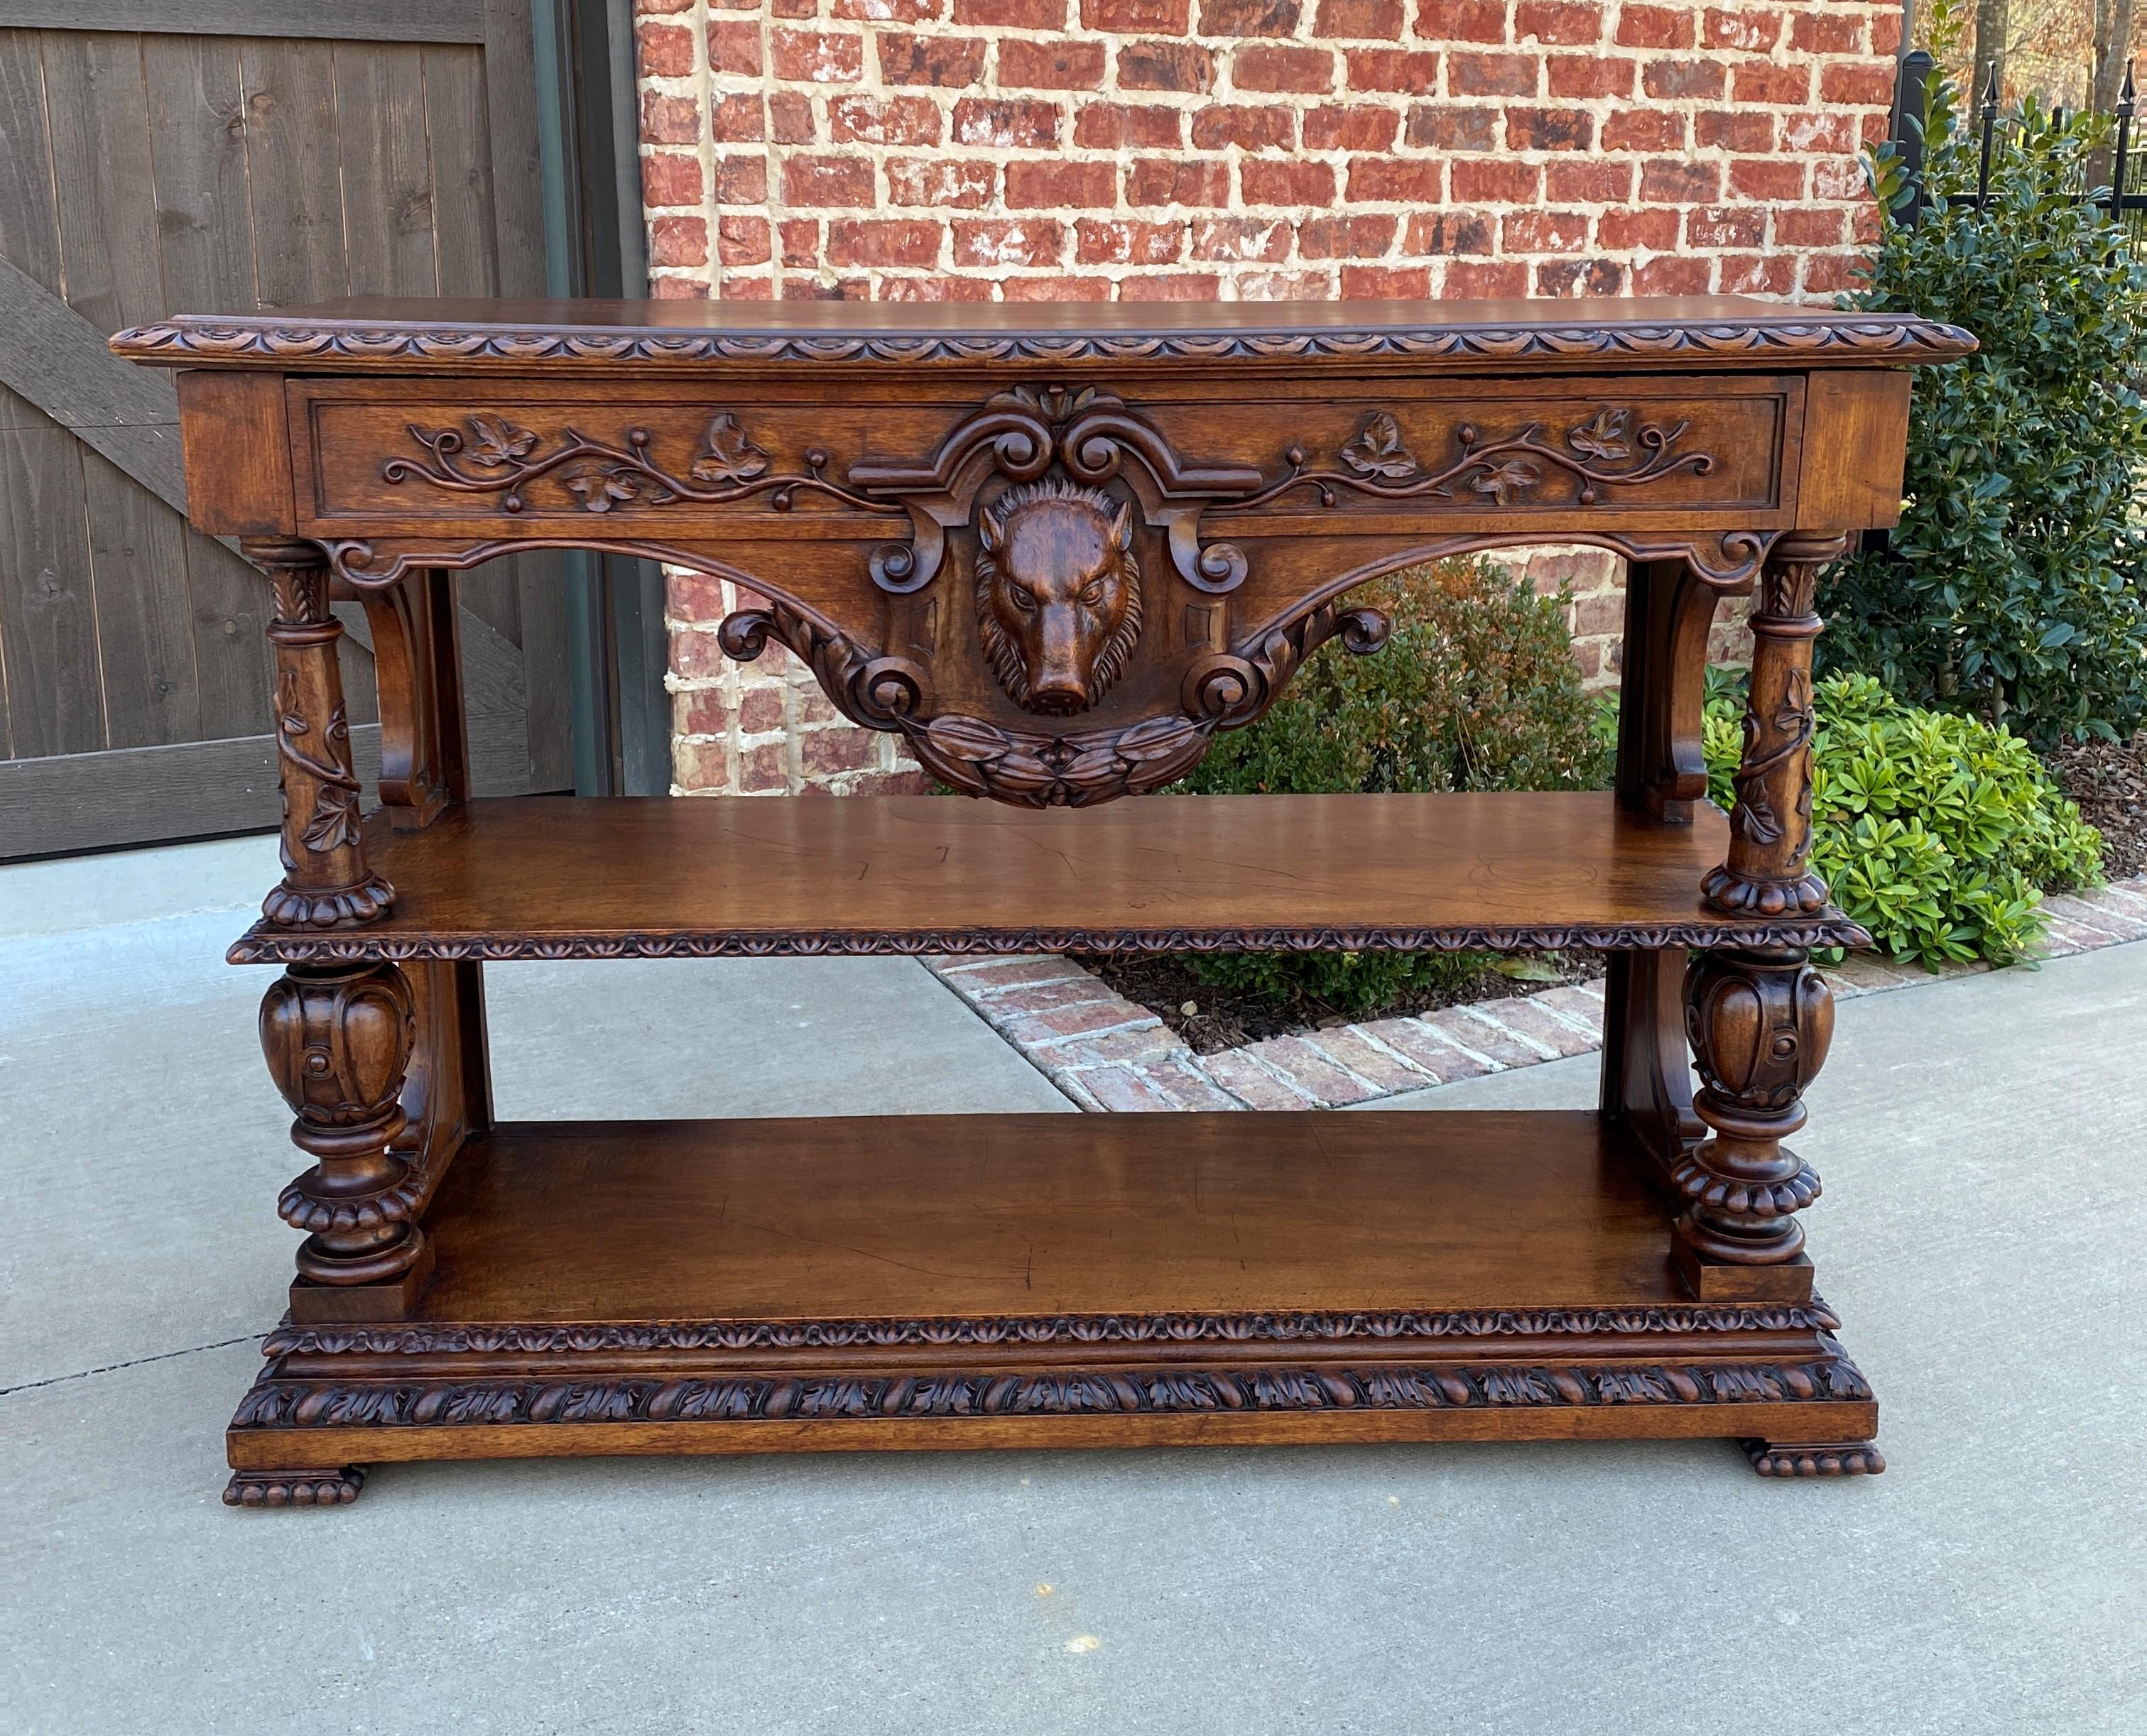 Exquisite Antique French highly carved walnut 2-tier console, sofa table or sideboard / server with boars head mask~~leaf and vine carvings~~c. 1880s

Perfect for a foyer console table, living area sofa table, entry hall, sideboard or dessert